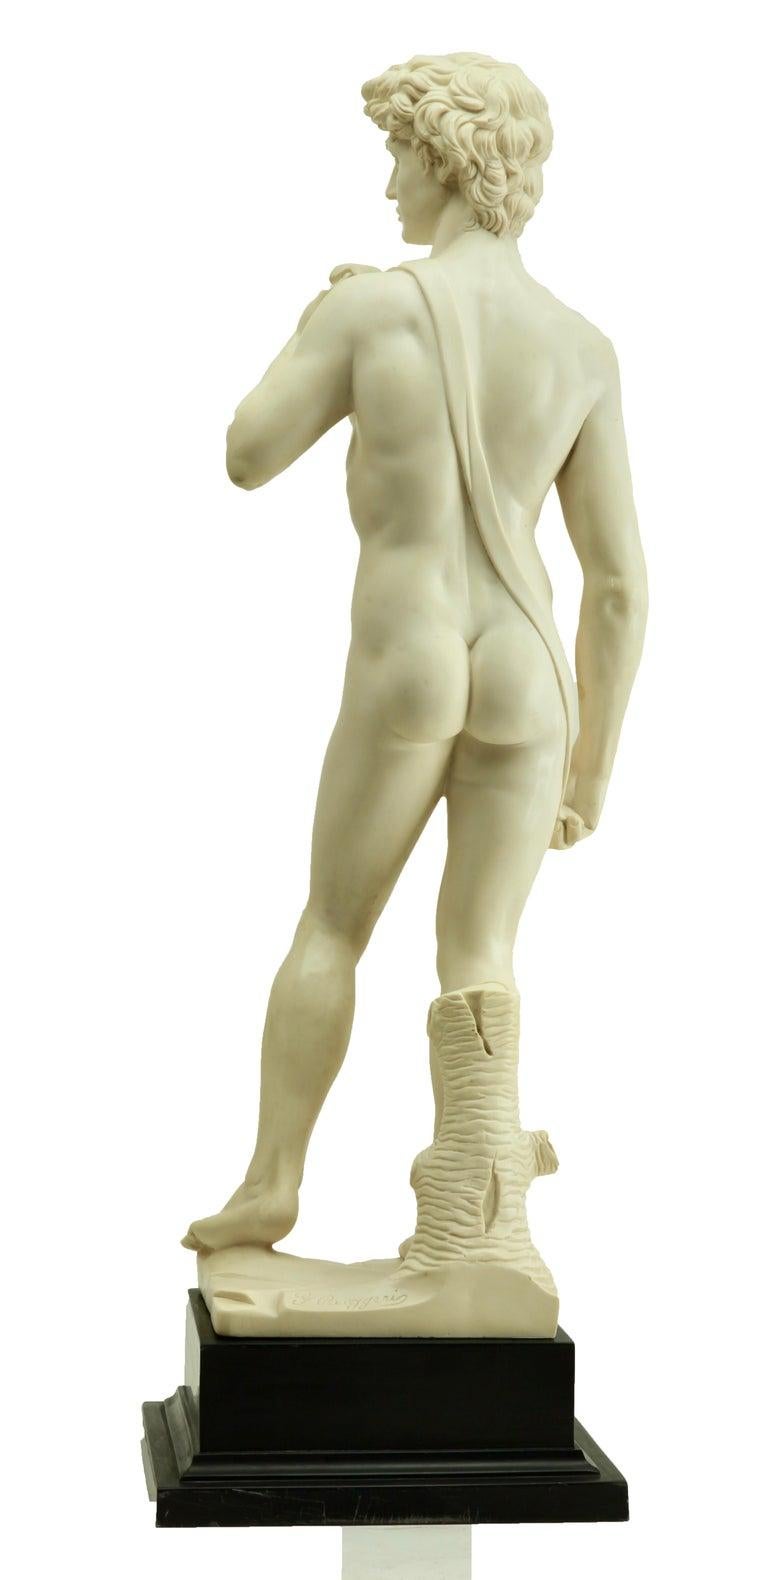 Detailed and Stylized Roman Statue of the 'David' Sculpted by G Ruggeri 1